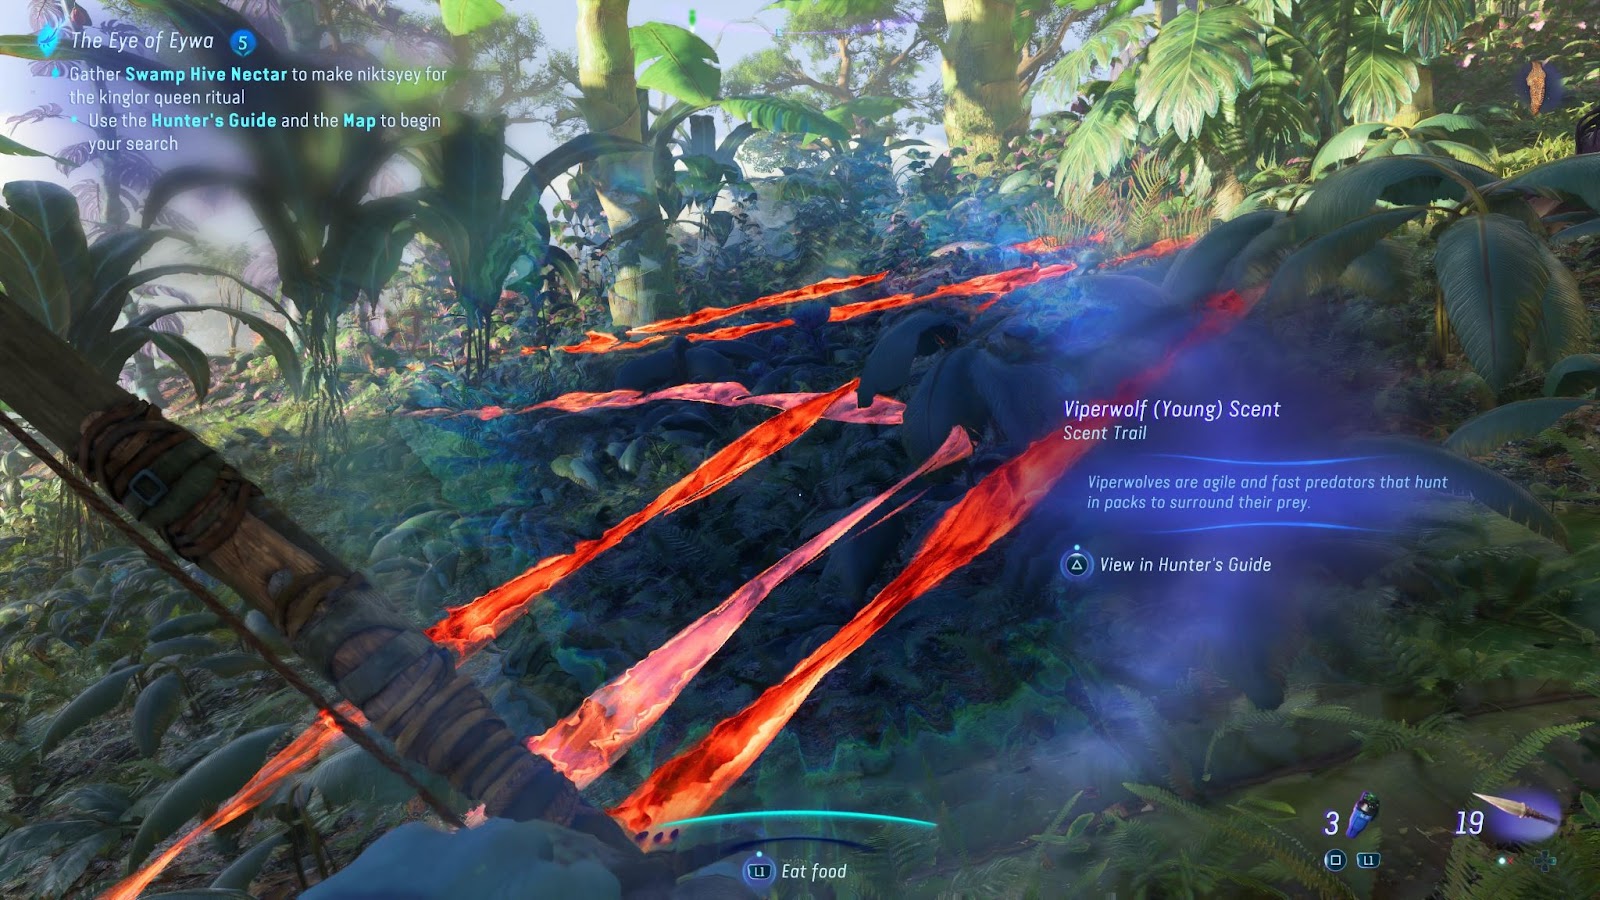 An in game screenshot of the scent trails in the game Avatar: Frontiers of Pandora